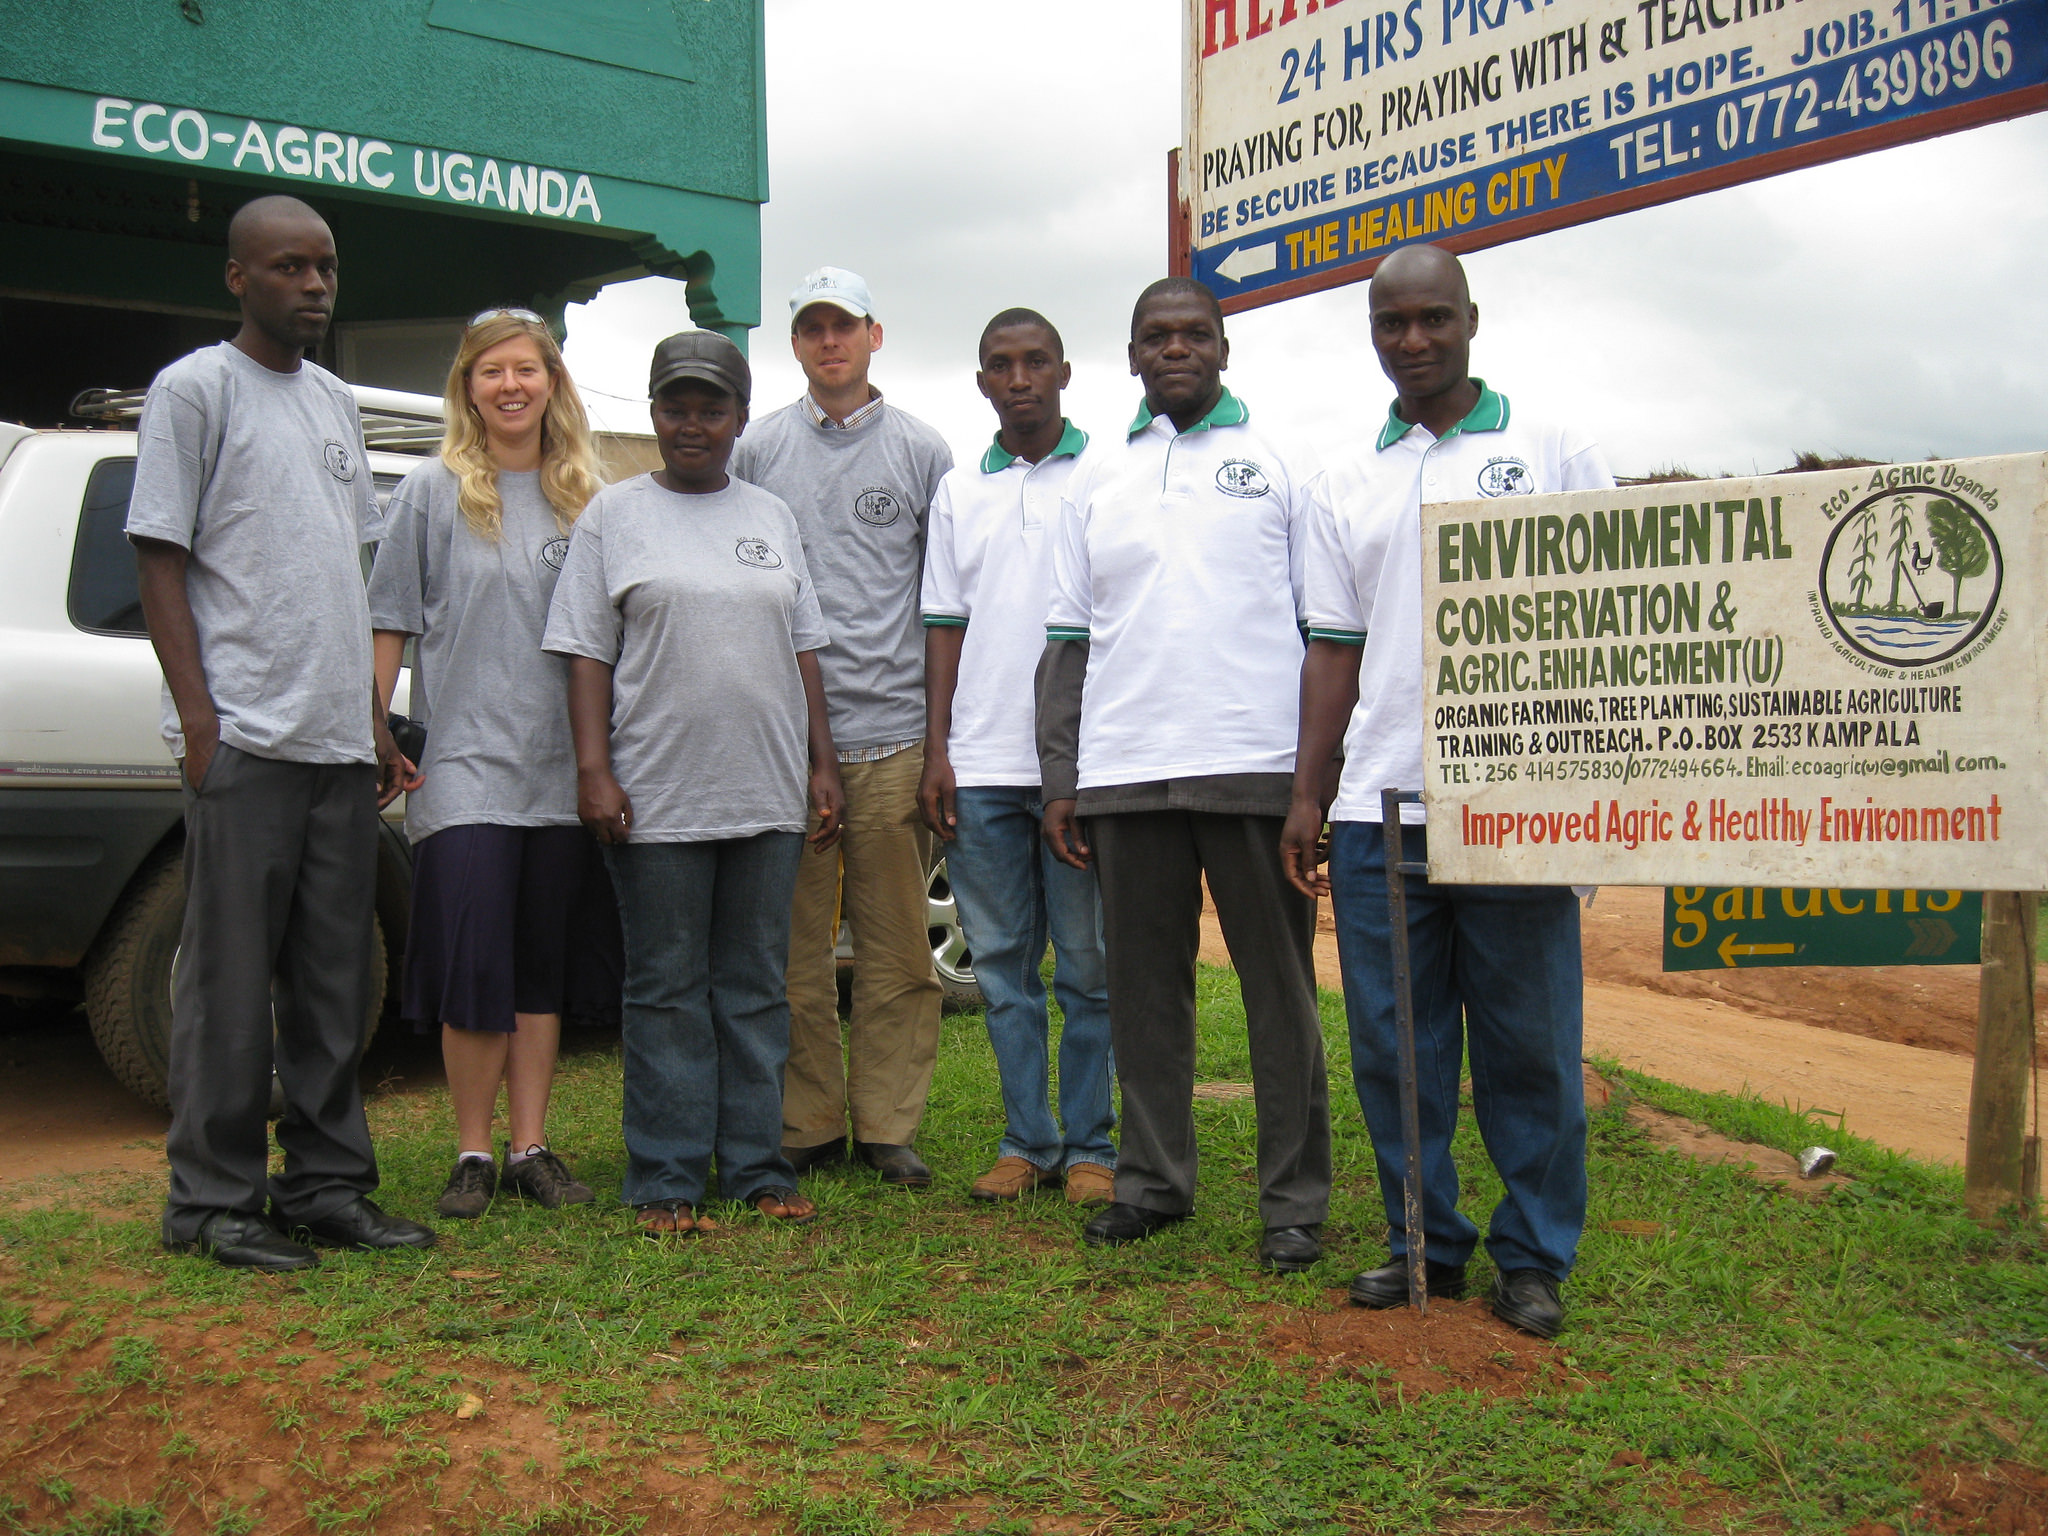 Group of Ugandan staff and volunteers, Shapland, and Peach-Fine in matching shirts stand next to a sign that reads "environmental conservation & agric.enhancement (U)...improved agric & healthy environment"